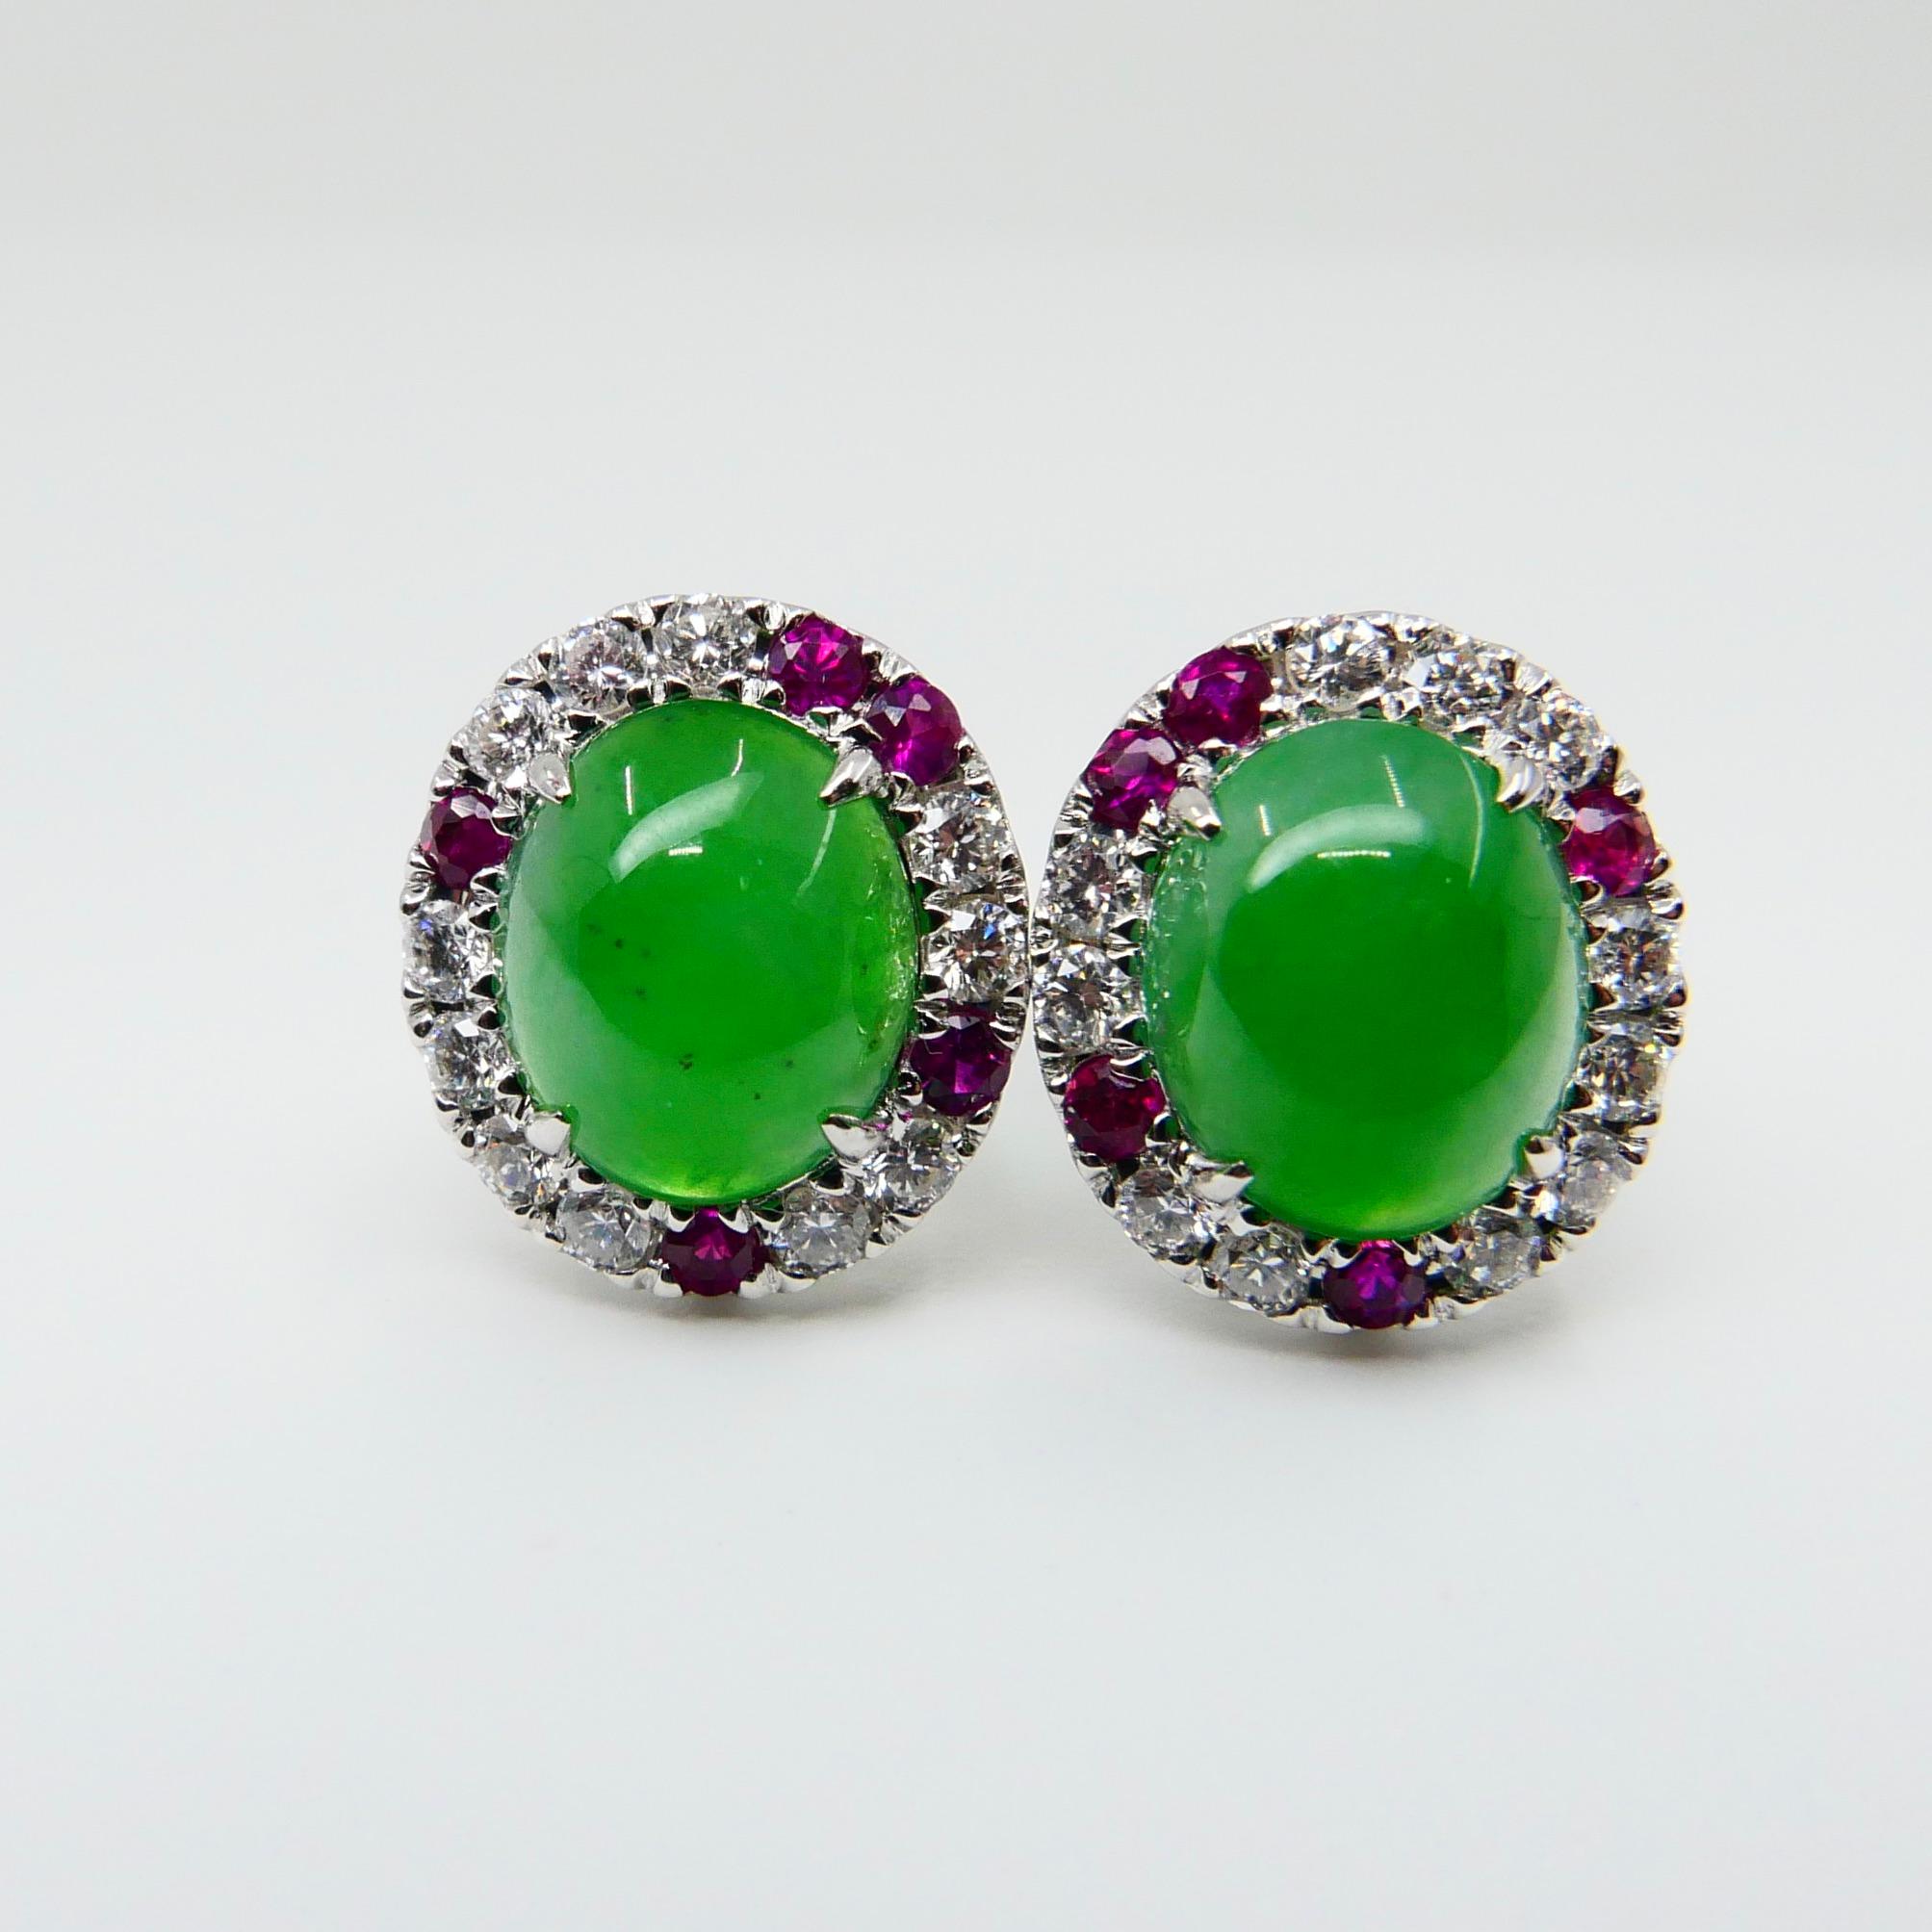 Certified Natural Type A Jade, Ruby and Diamond Stud Earrings, Apple Green Color 6